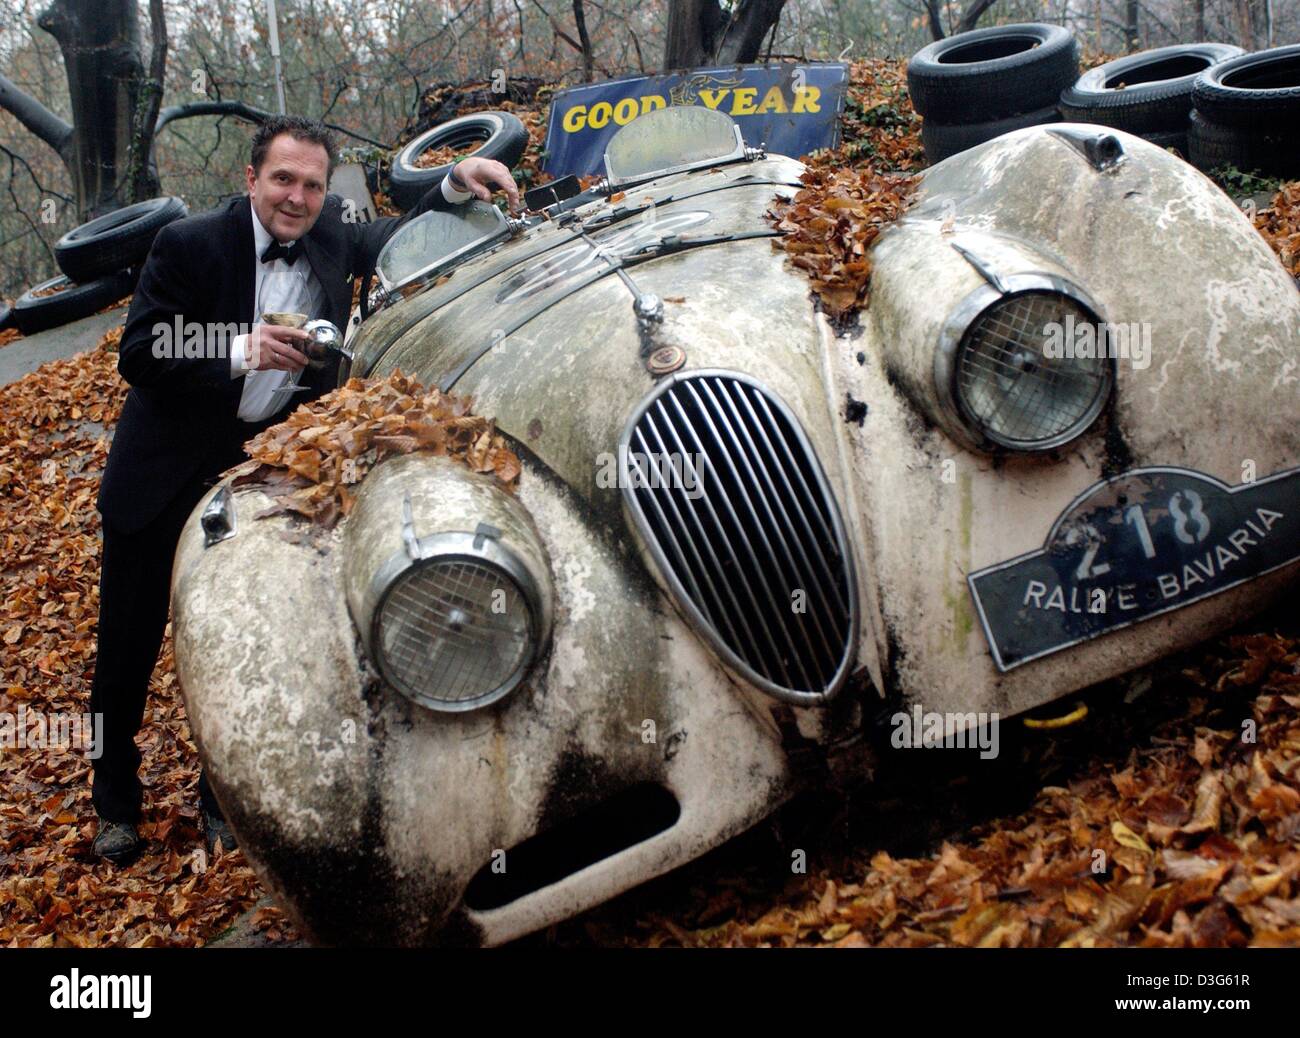 (dpa) - Michael Froehlich holds a glass of white wine while he leans onto a Jaguar XK 120 from the year 1950, which is in the process of decomposing in his garden near Mettmann, Germany, 16 November 2003. Froehlich, who was born in 1950, had bought 50 historic cars of the year 1950 on his 50th birthday three years ago. Since, the rotting cars are left outside and form a gallery of  Stock Photo